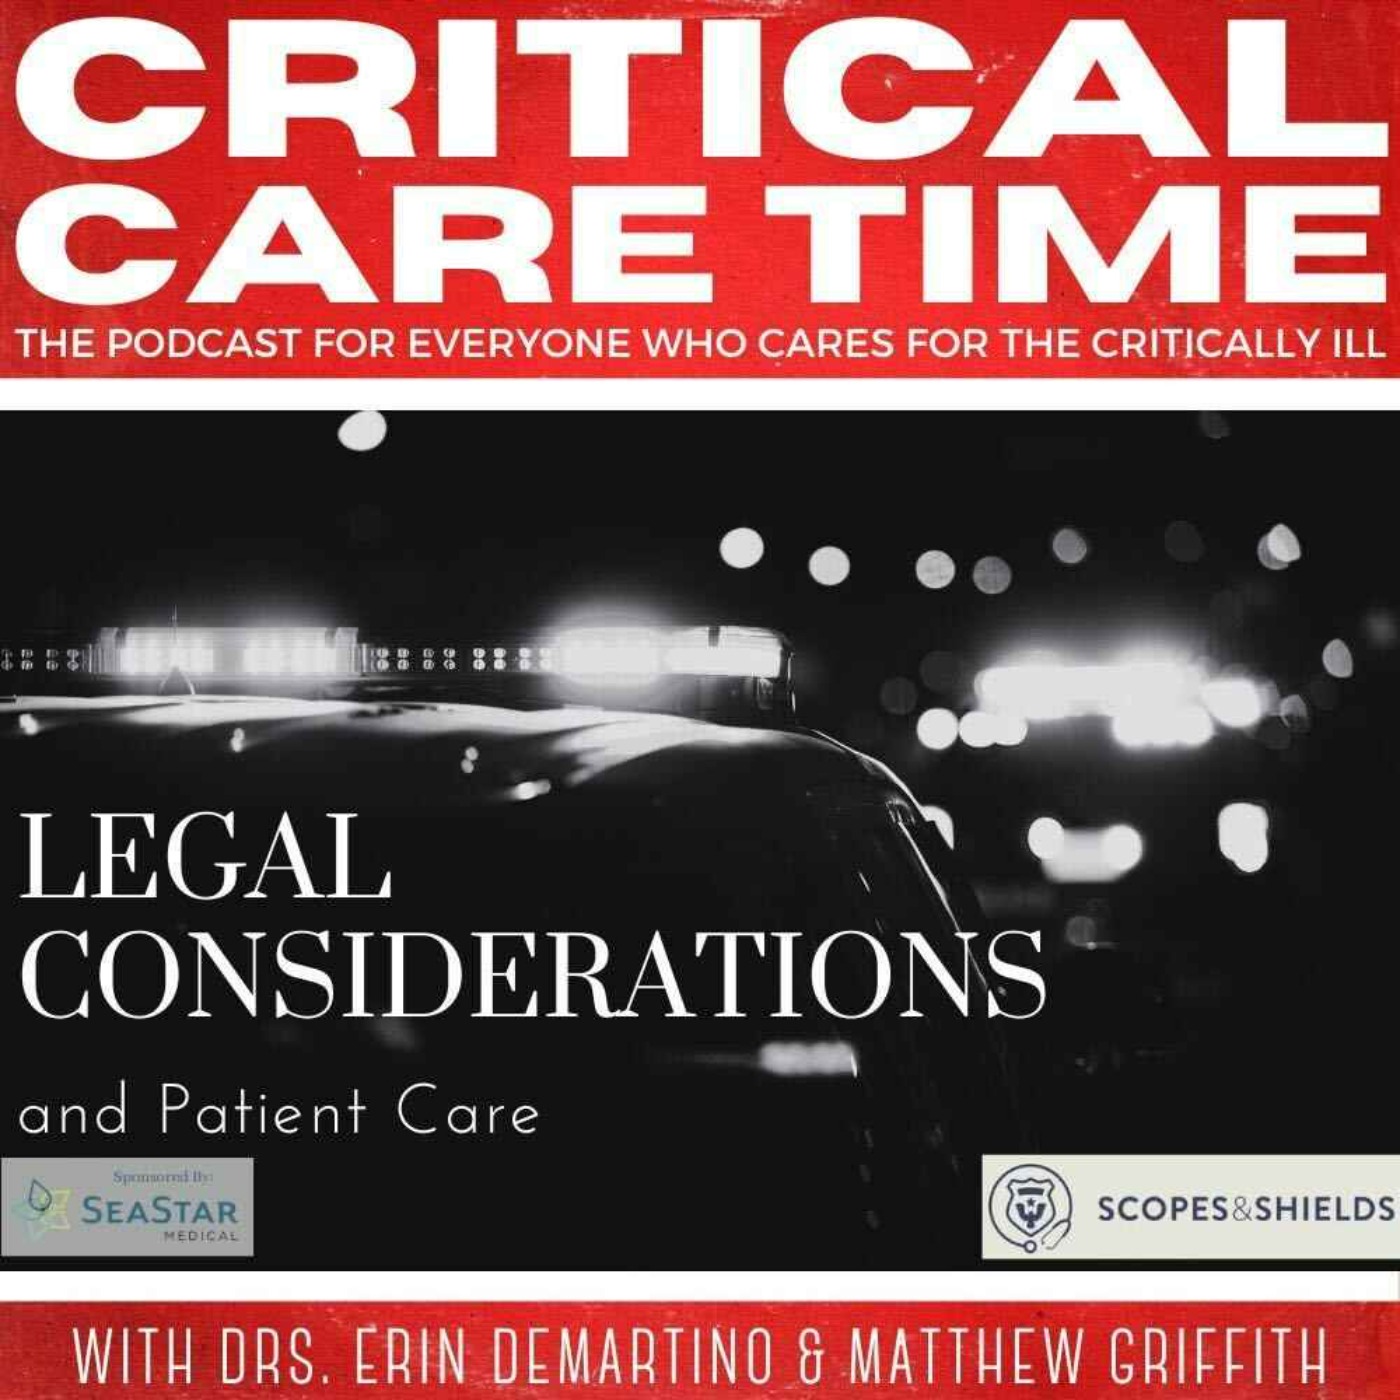 8. Legal Considerations and Patient Care with Drs. Erin DeMartino & Matthew Griffith